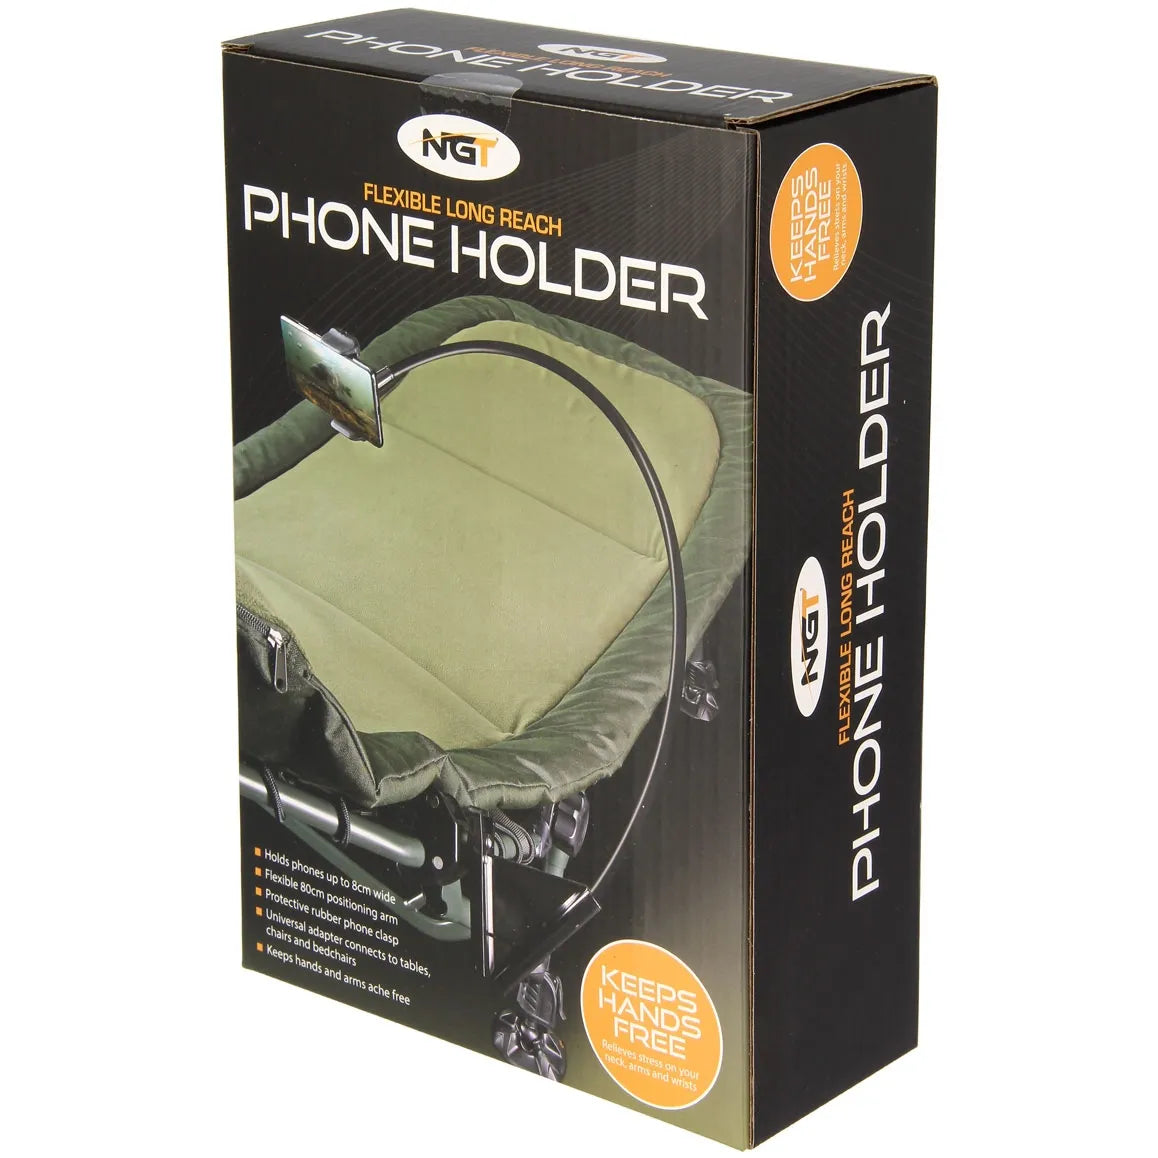 NGT Phone Holder - A Phone holder with Chair Adaptor and Flexi Arm